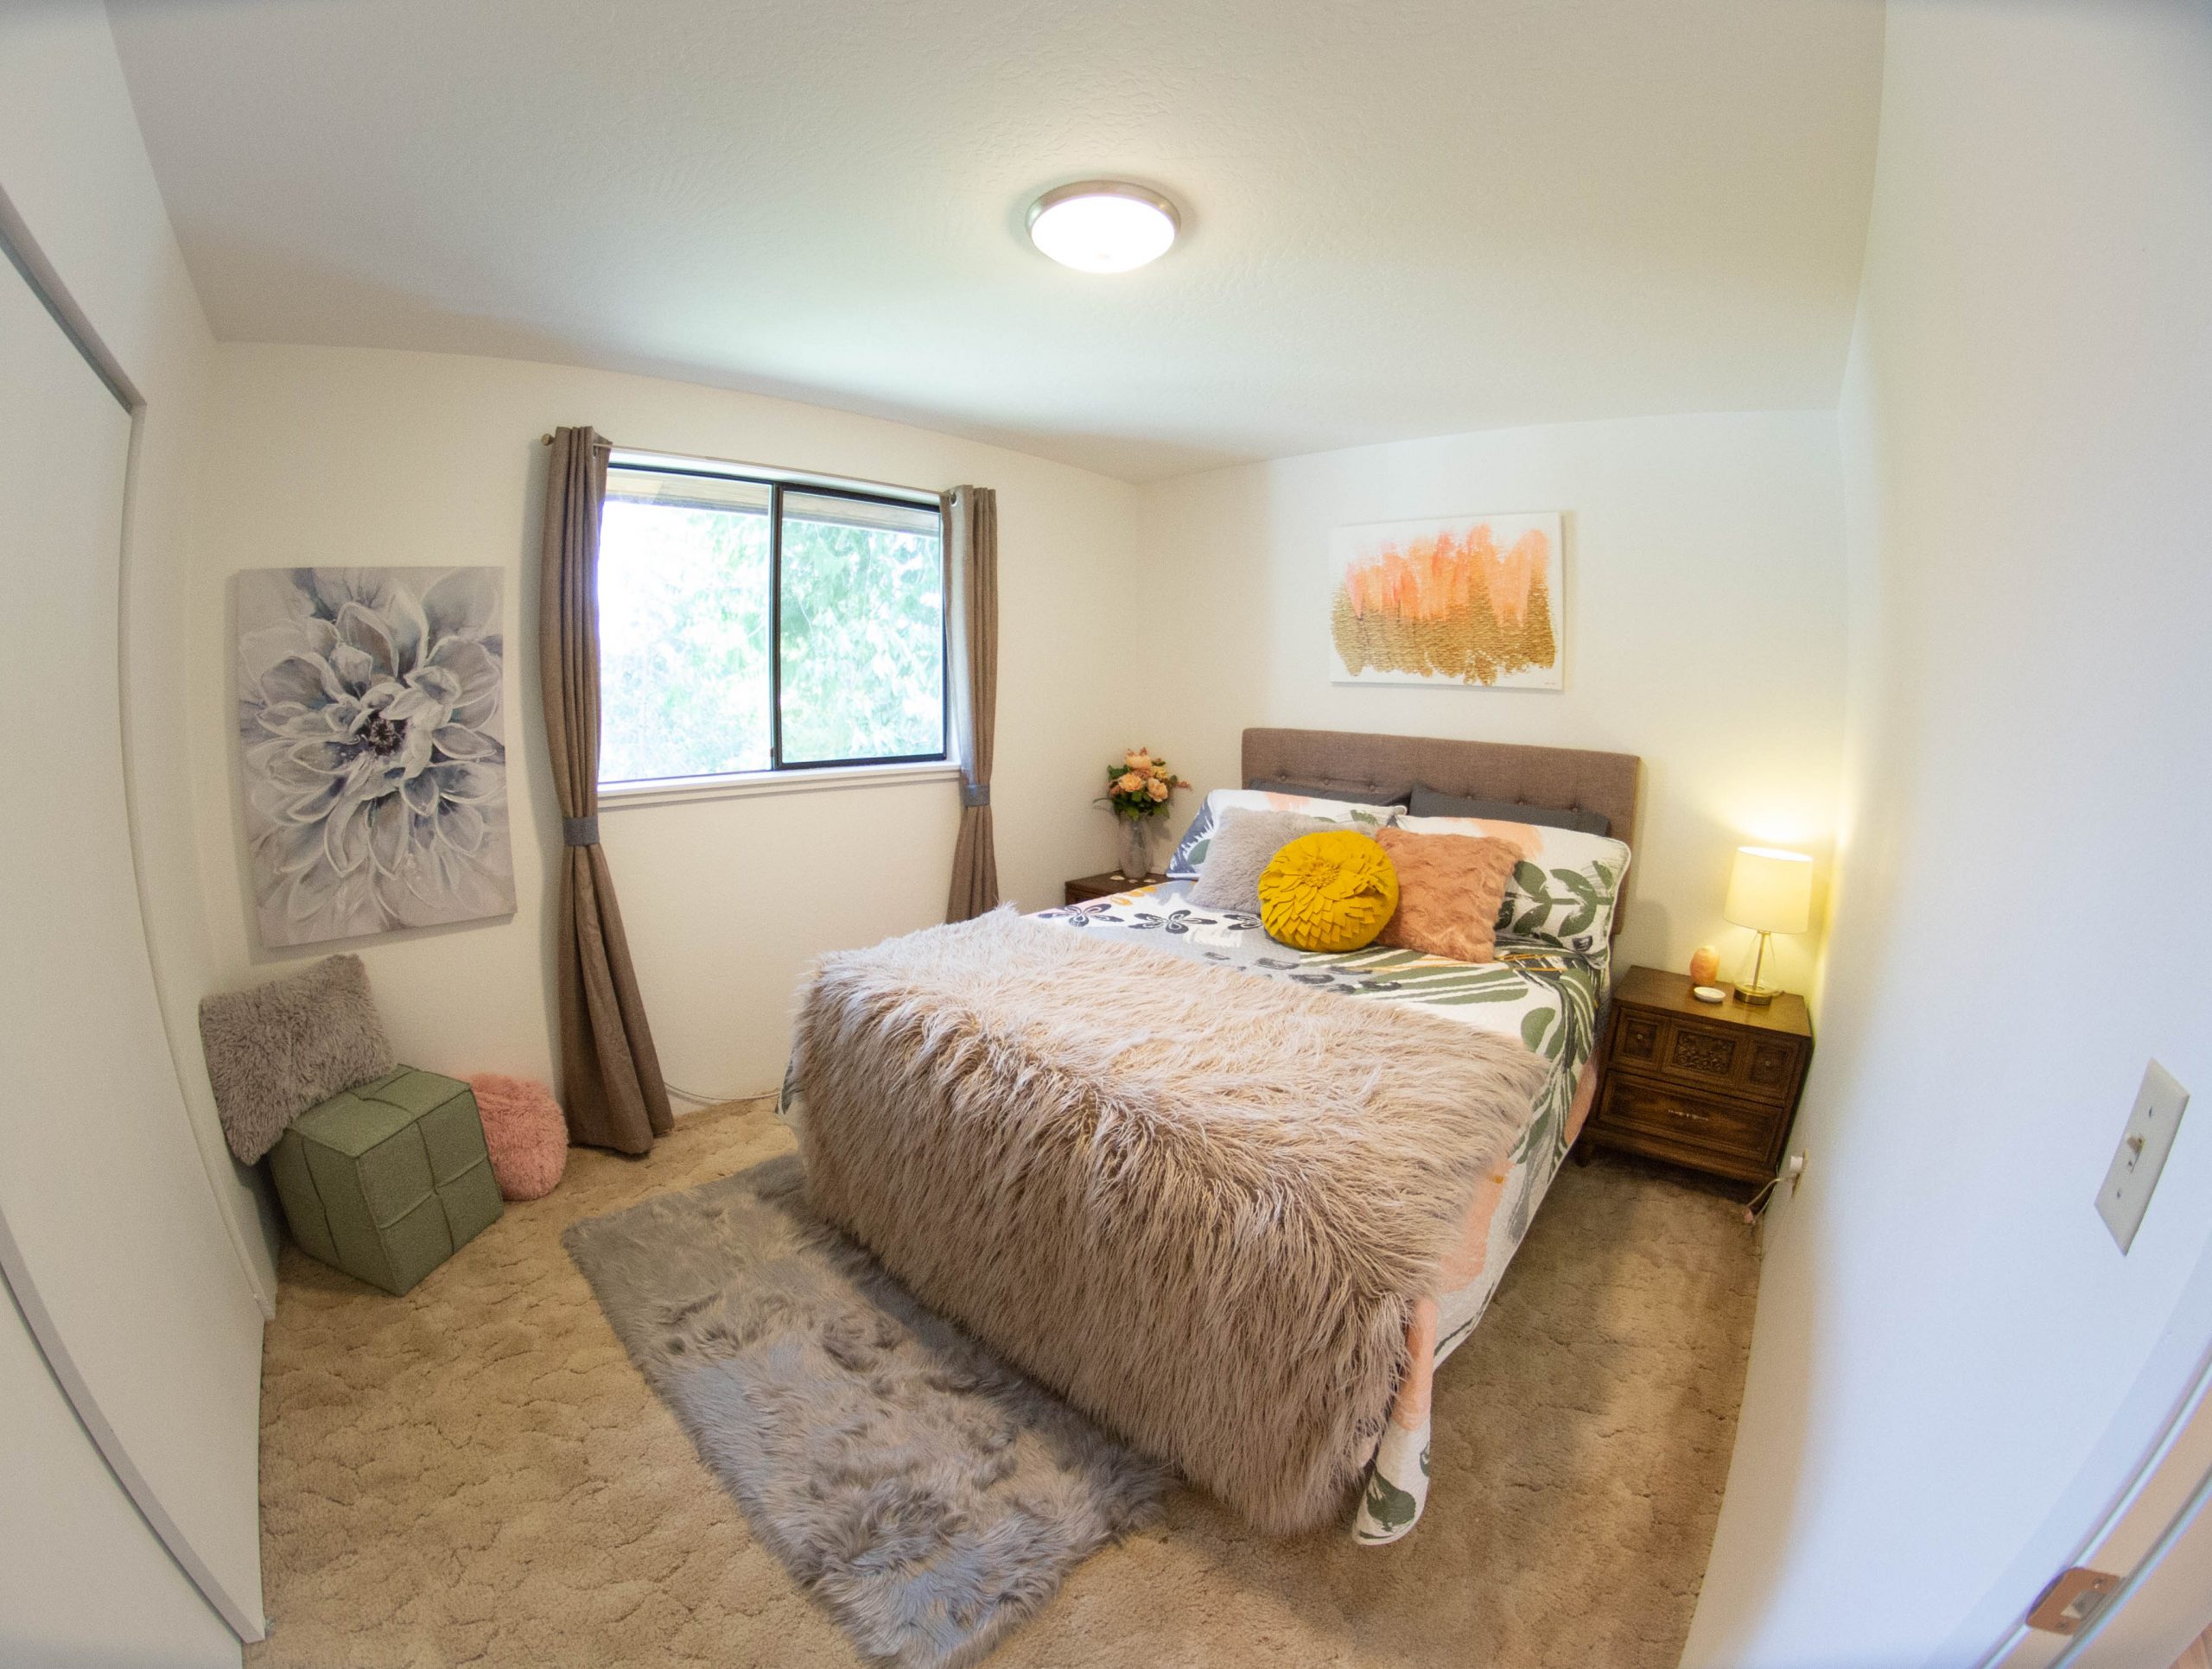 Queen-Bed-Room-Group-Family-Angels-Landing-Port-Angeles-Washington-Vacation-Home